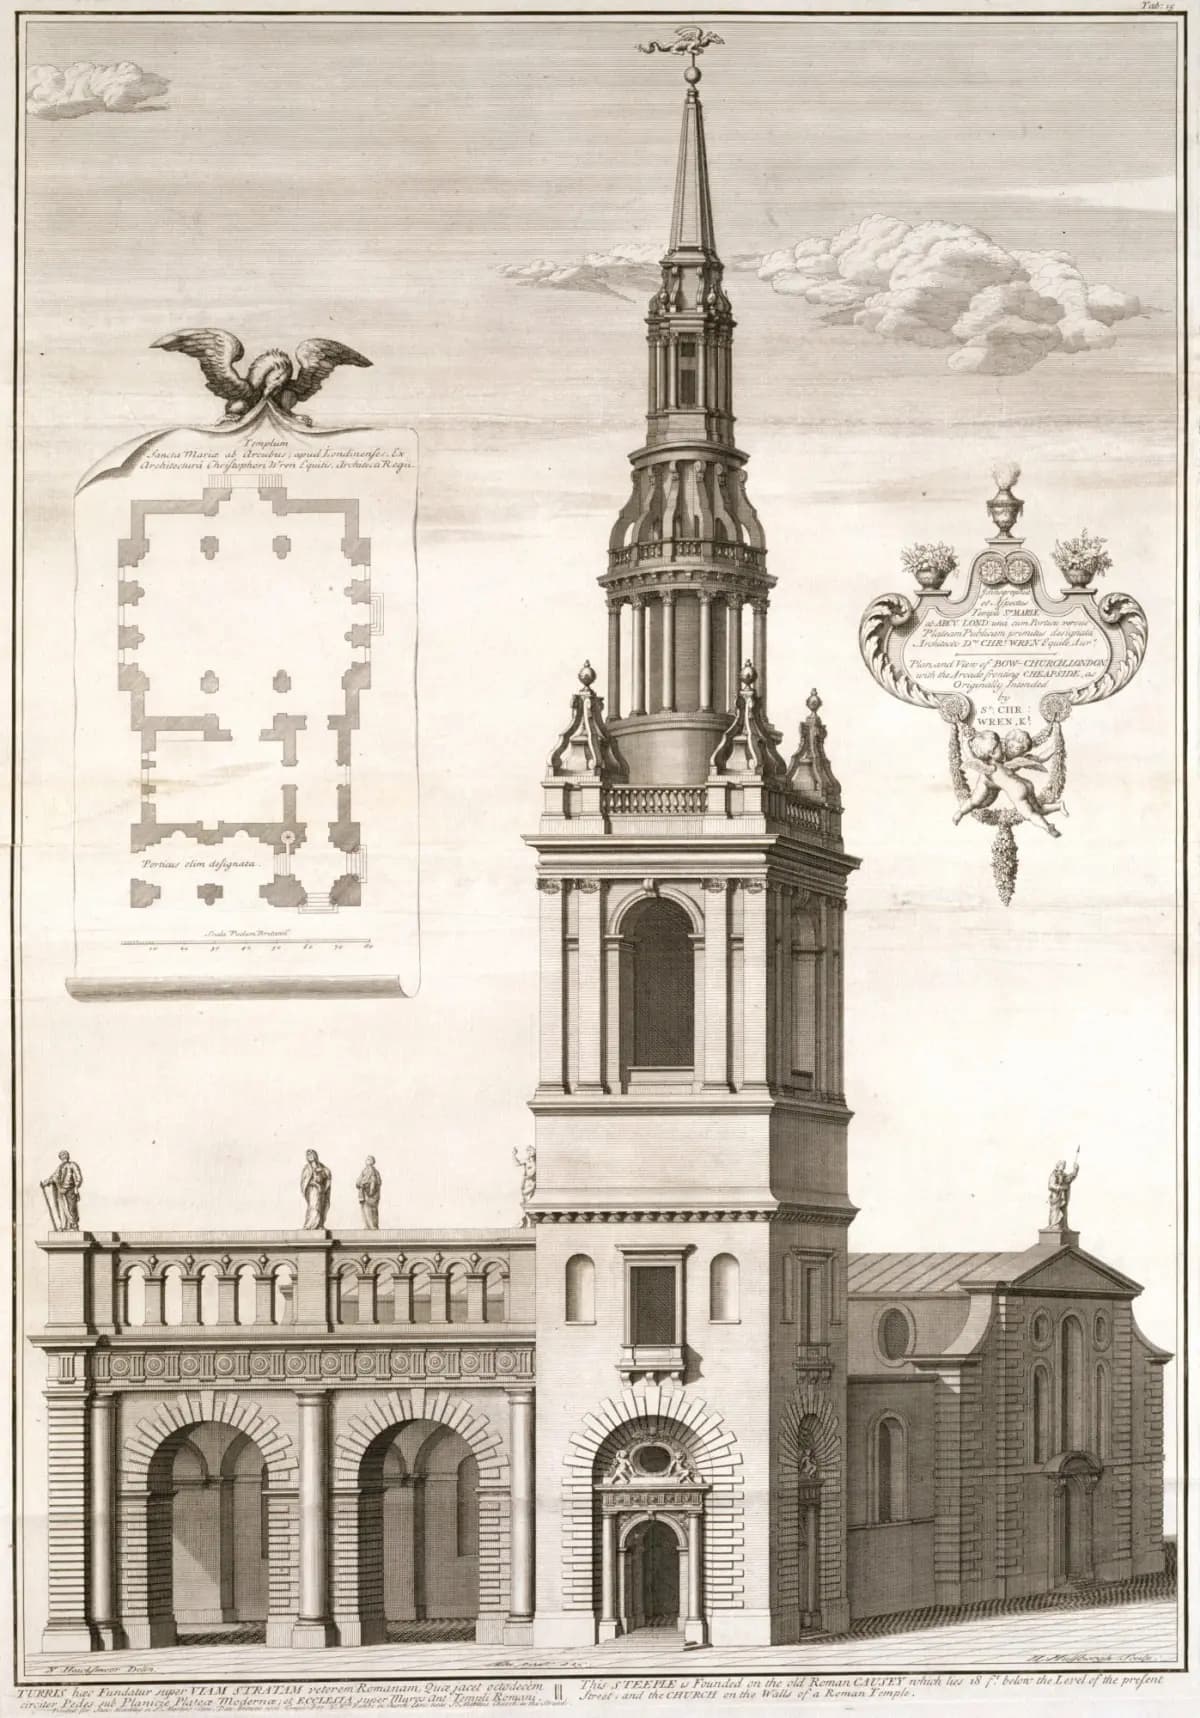 Nicholas Hawksmoor: Christopher Wren’s St Mary-le-Bow Church plan and perspective, ca 1720–23 (London: Royal Academy of Arts)